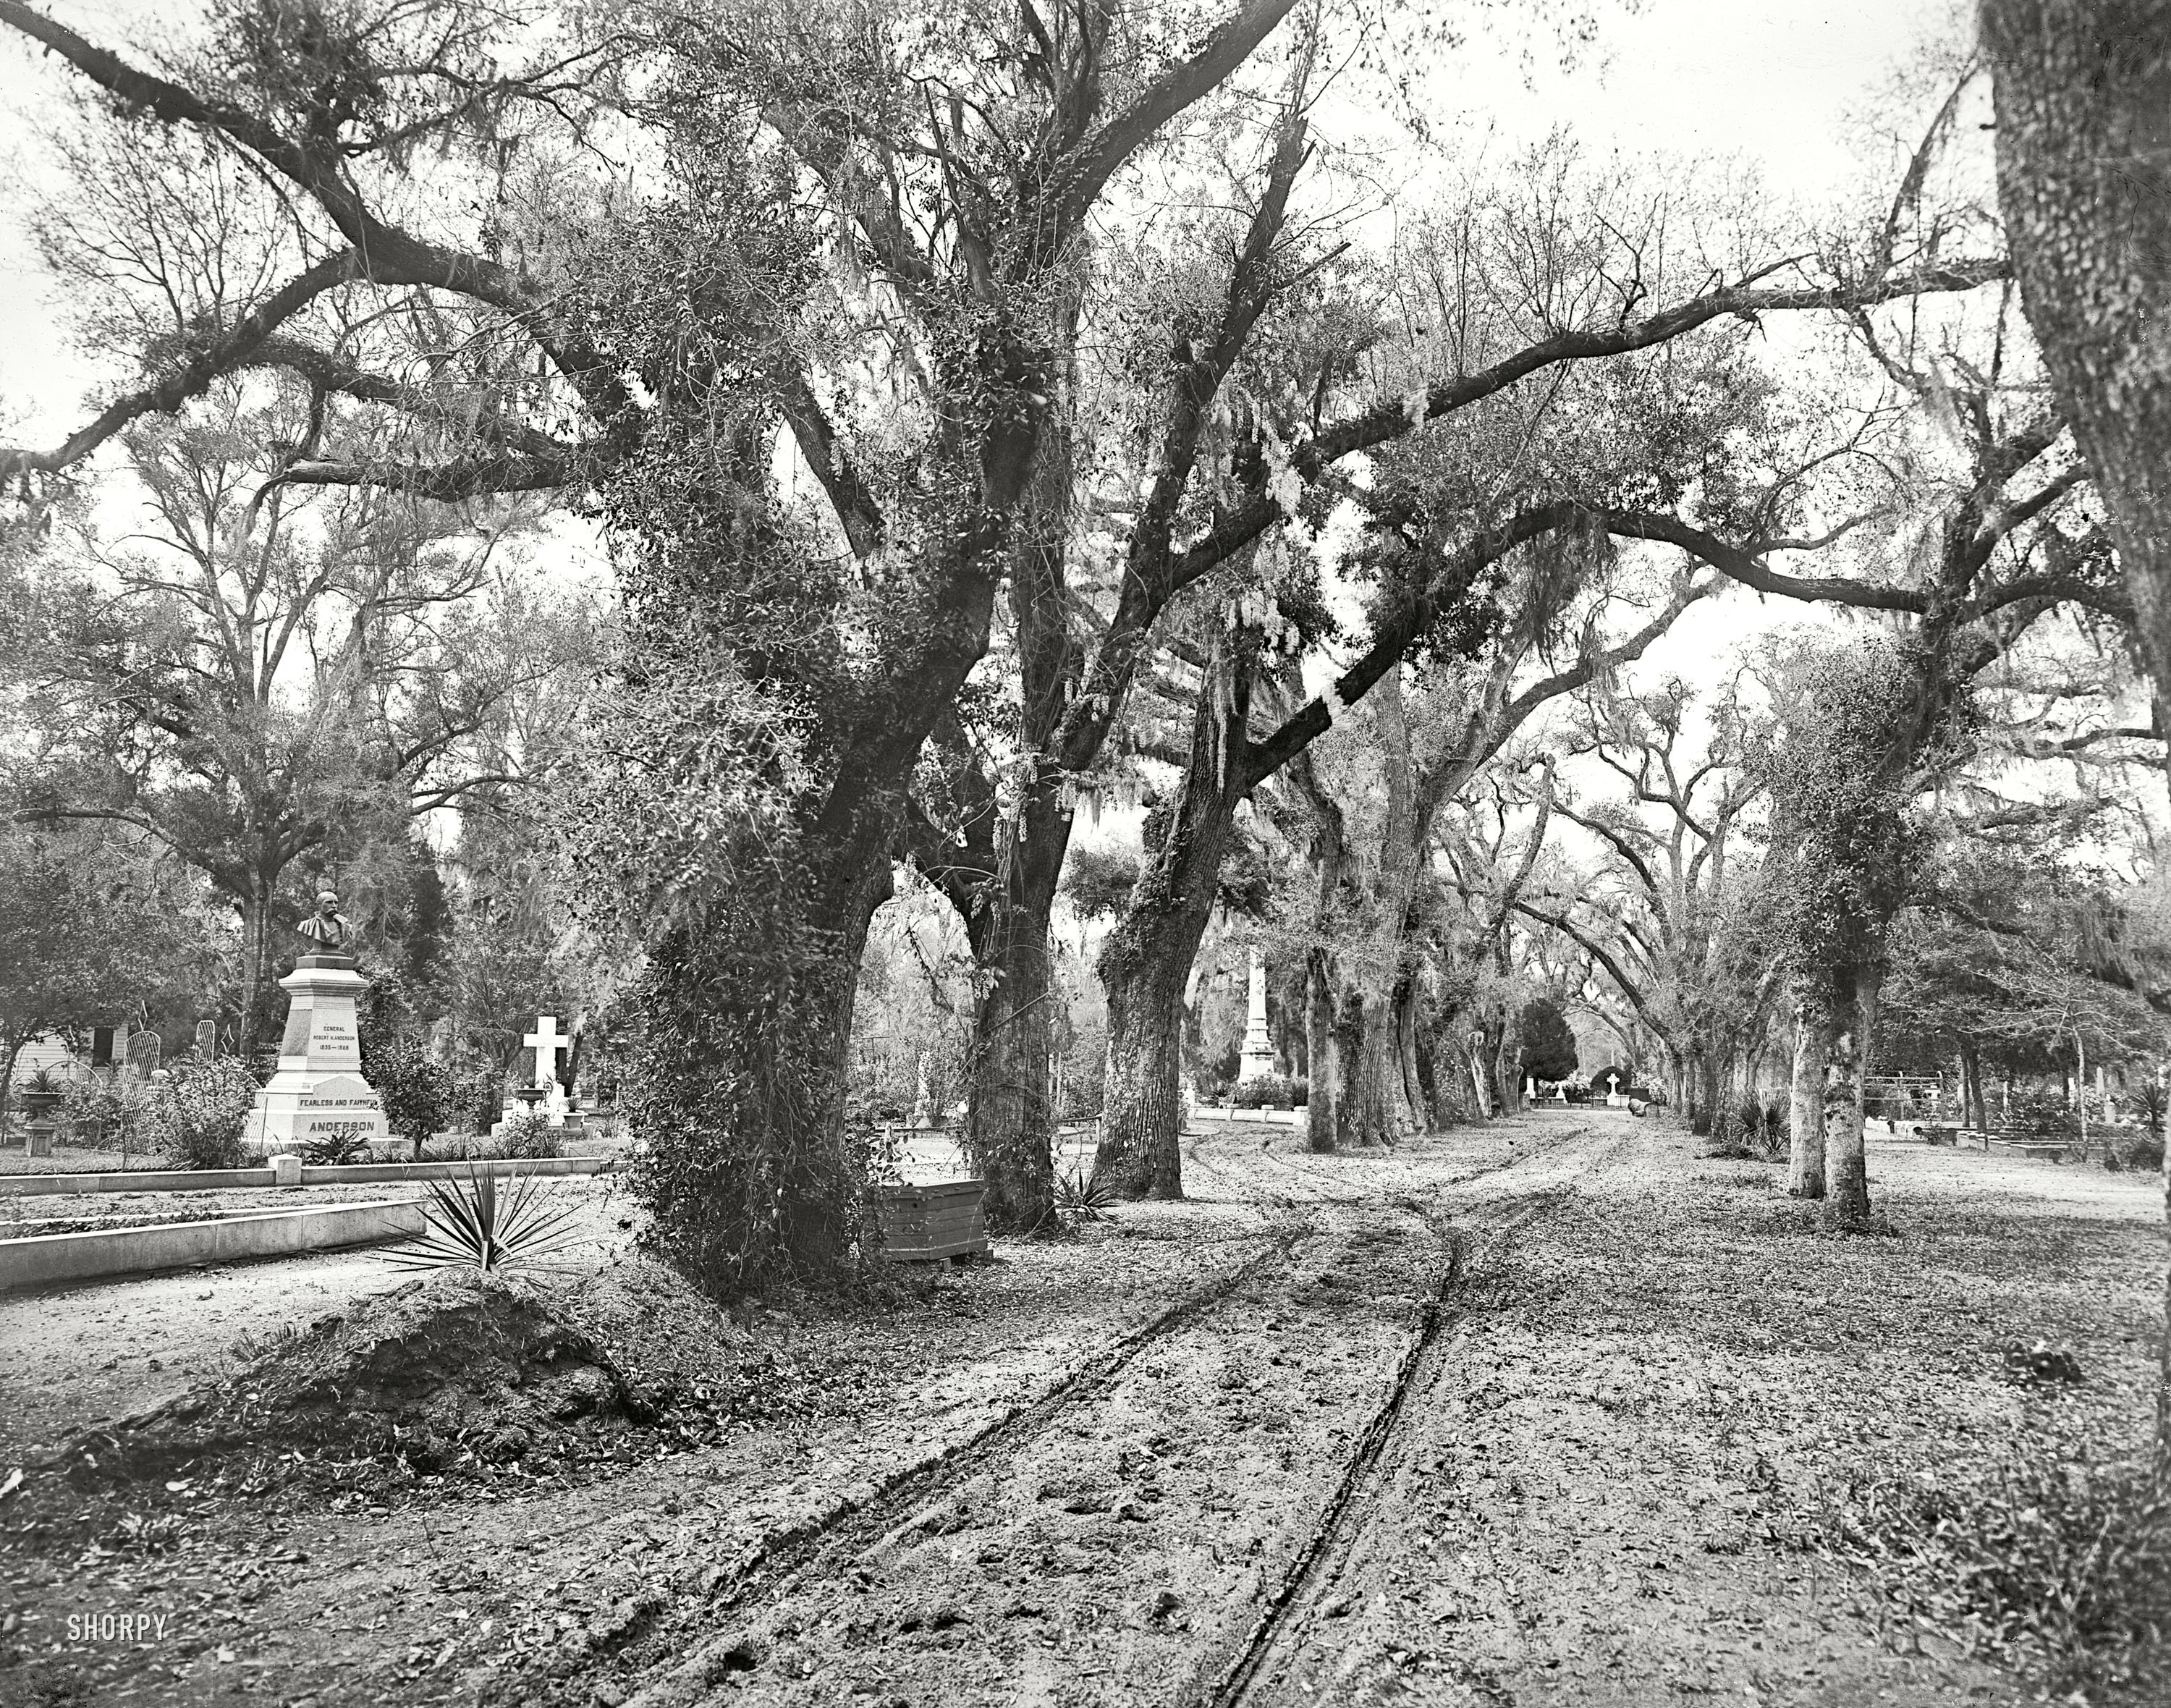 Circa 1901. "Bonaventure Cemetery. Savannah, Georgia." The locals say it's best not to travel alone here after sundown. 8x10 inch glass negative. View full size.